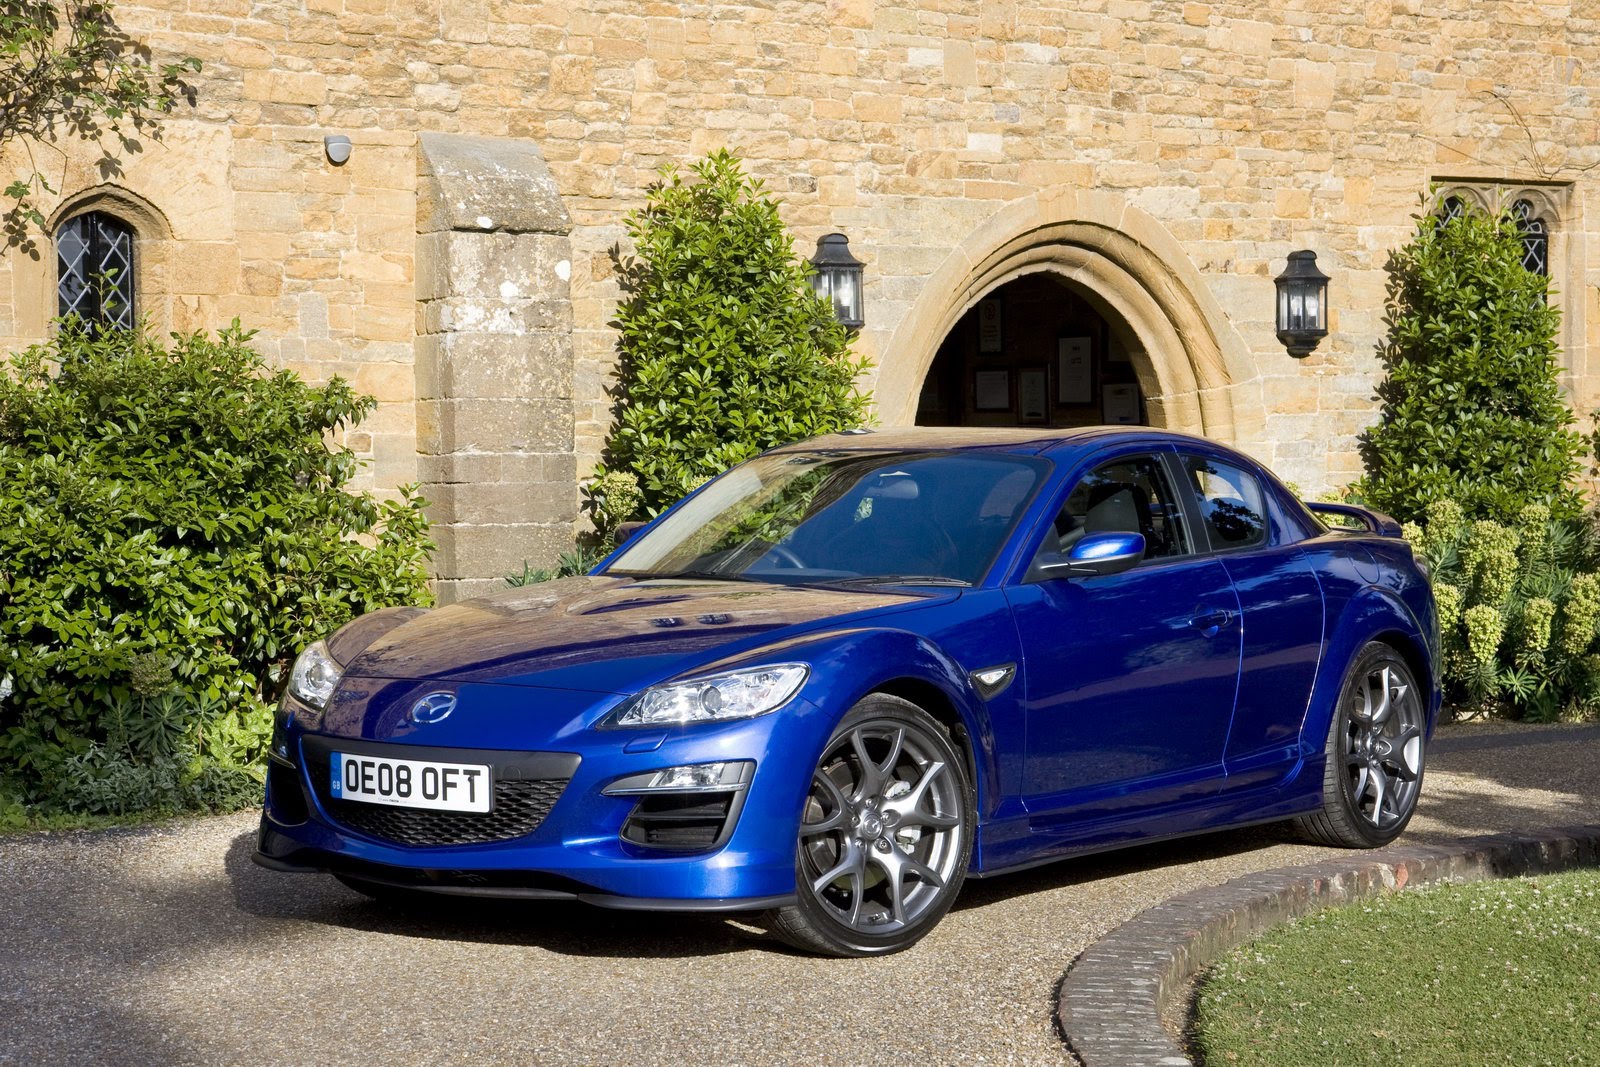 End of the road for Mazda RX-8 in the UK, less than 100 examples left ...